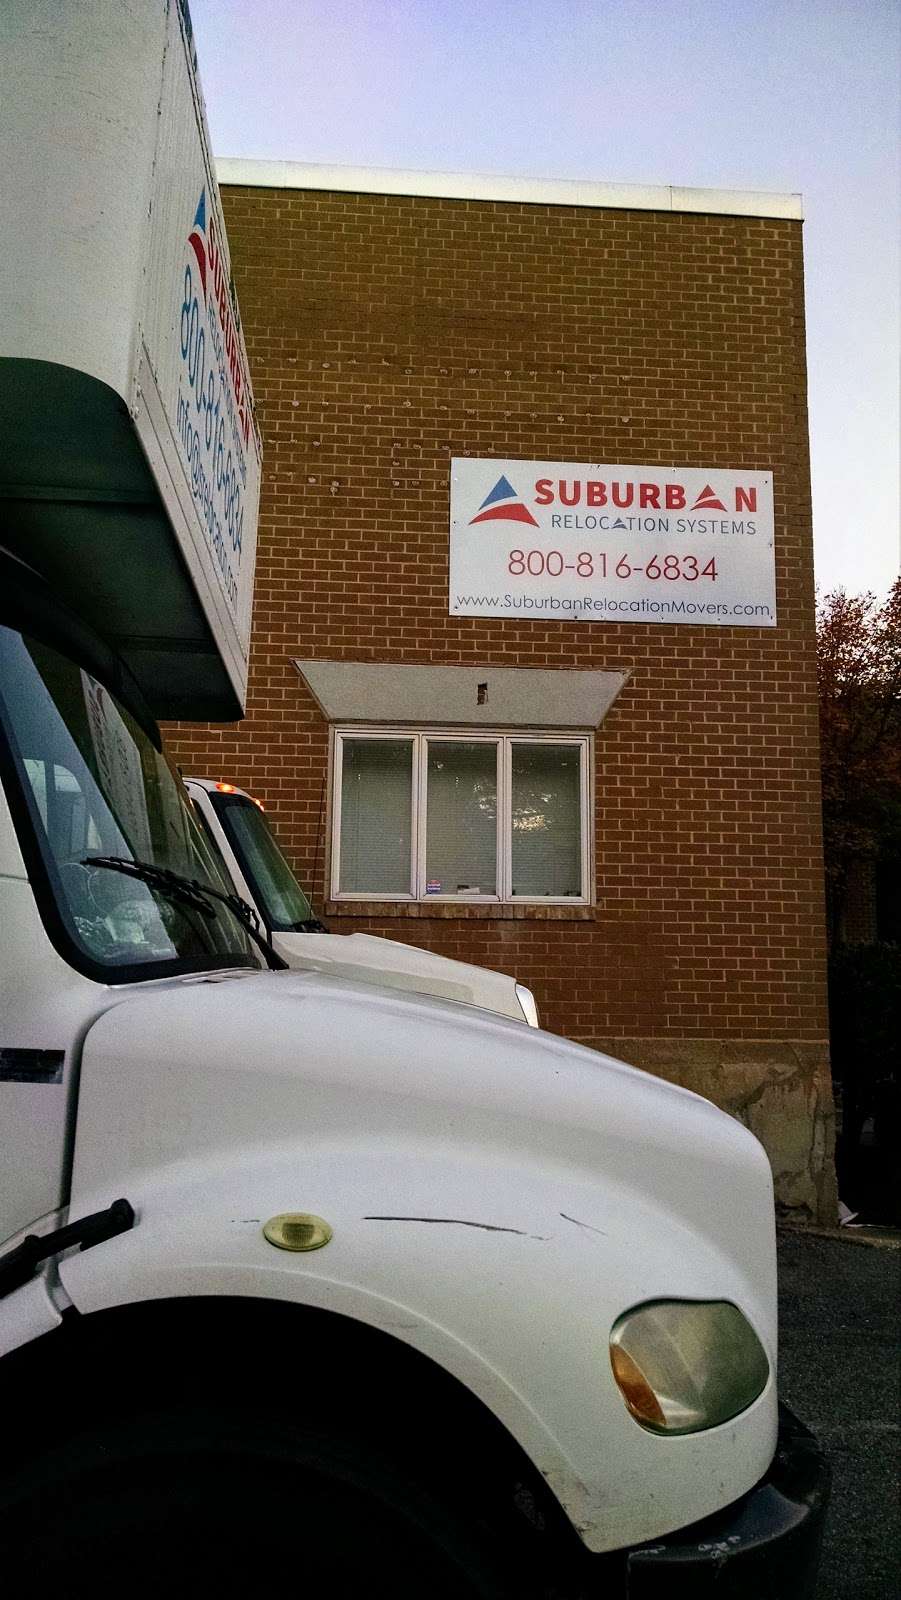 Suburban Relocation Systems | 12000 Old Baltimore Pike, Beltsville, MD 20705 | Phone: (800) 816-6834